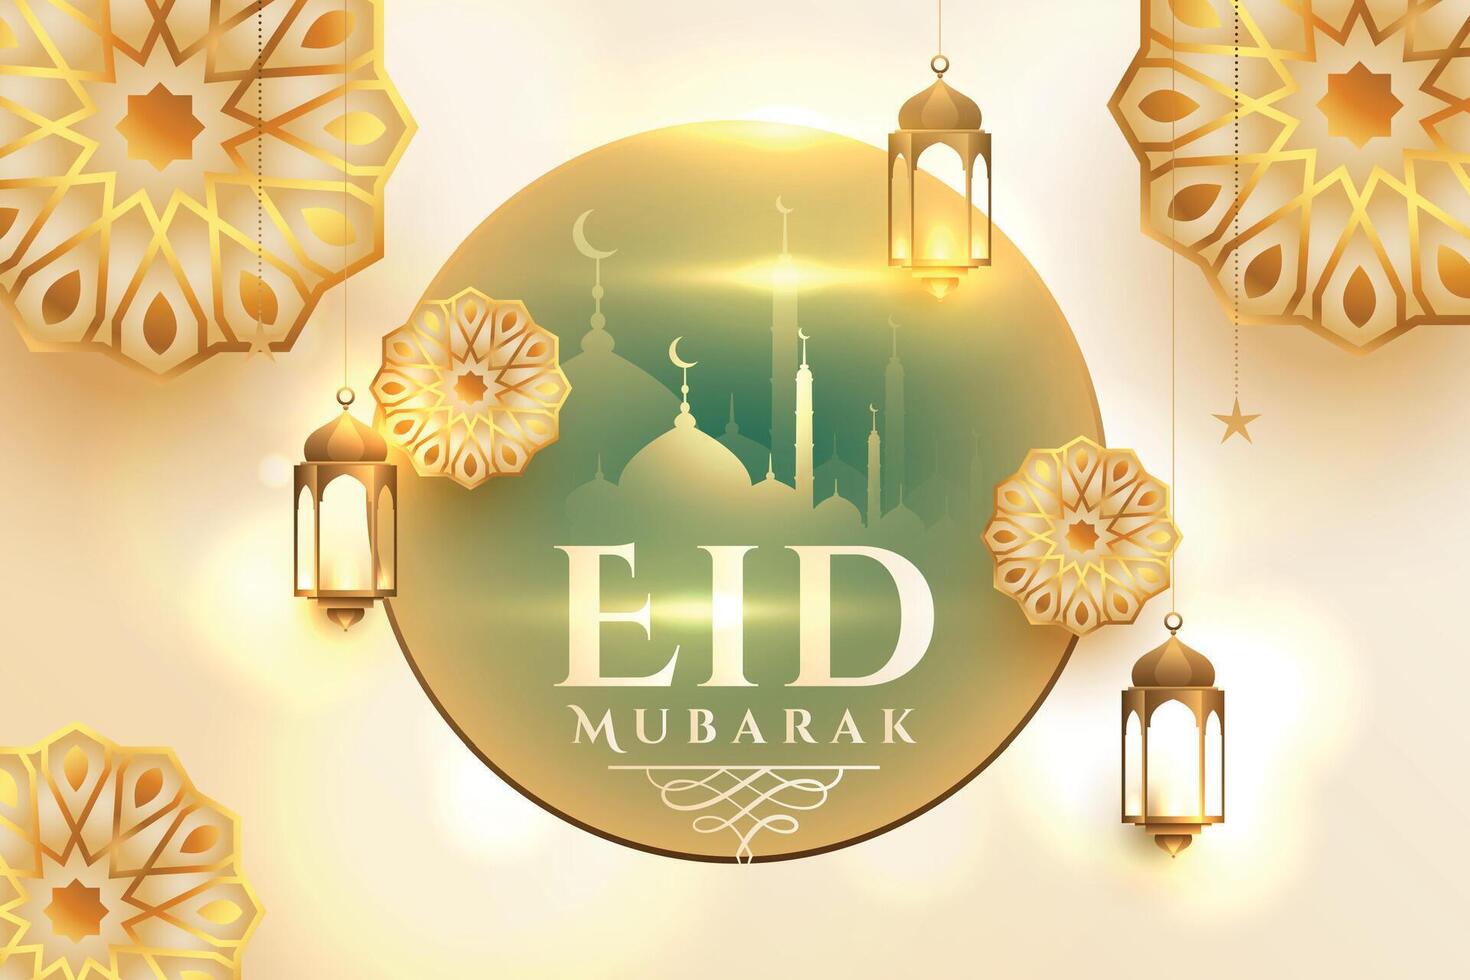 Eid mubarak with text and color background vector